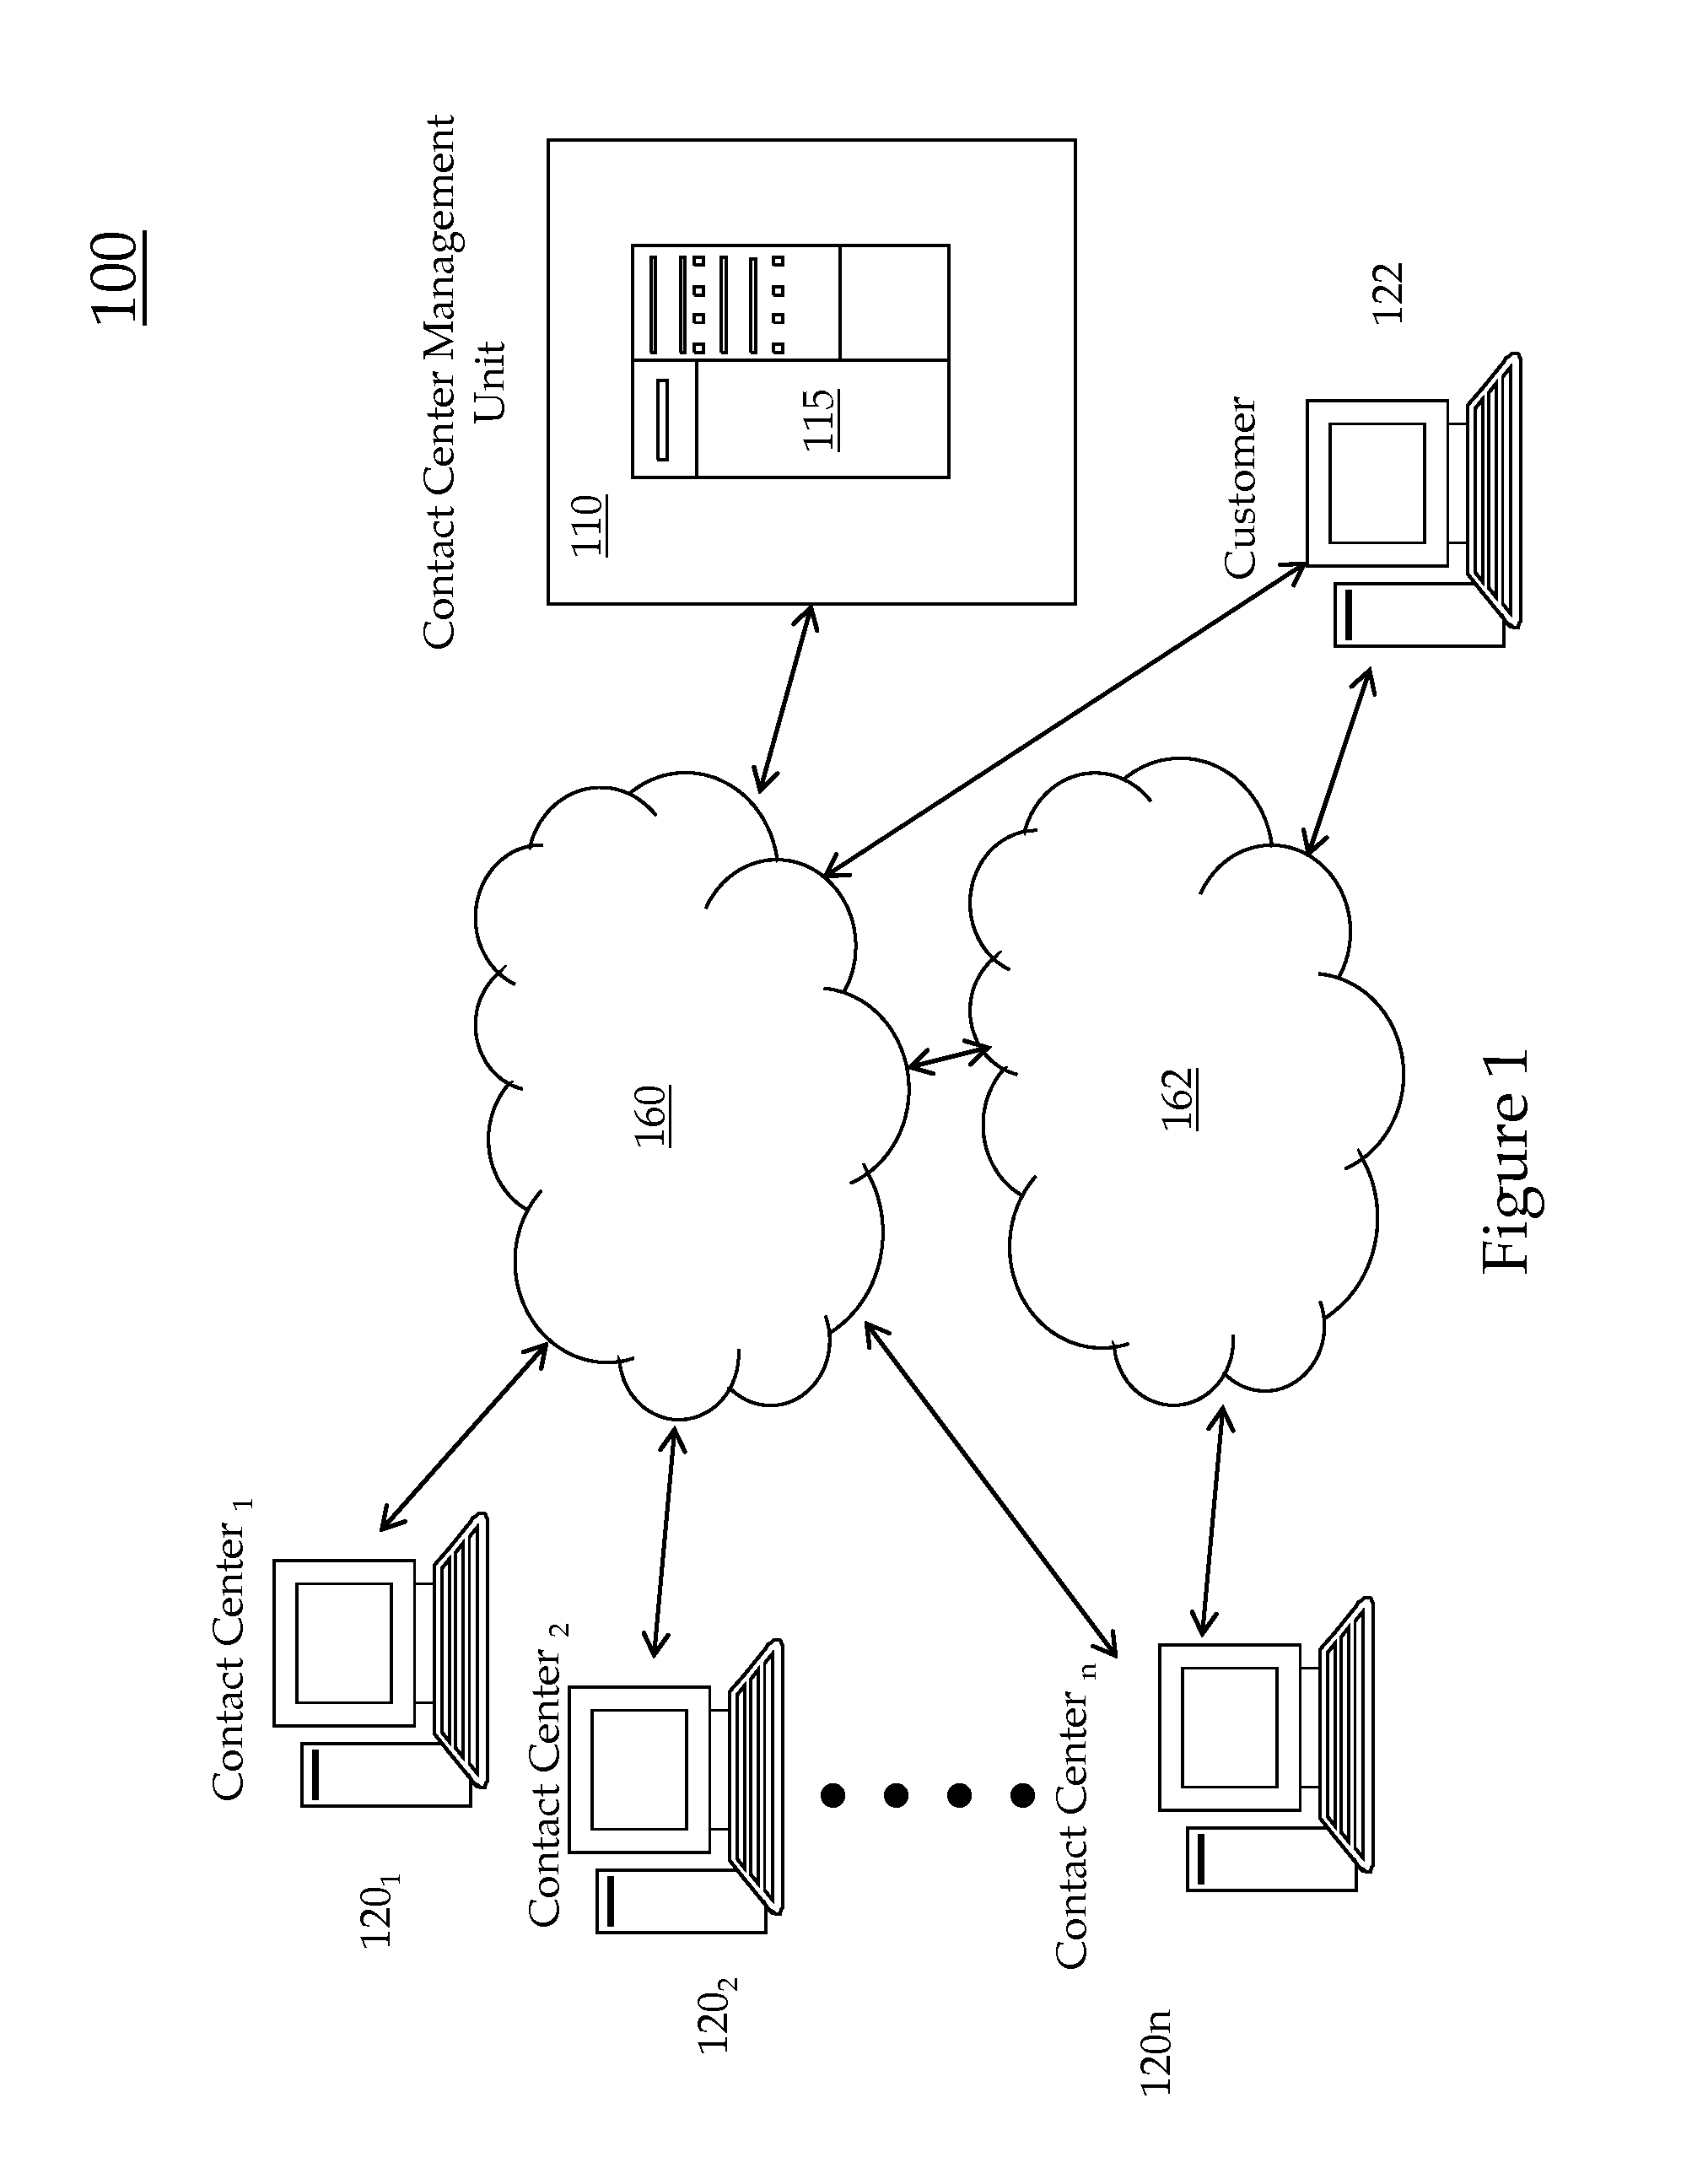 System and method for responding to changing conditions in contact centers